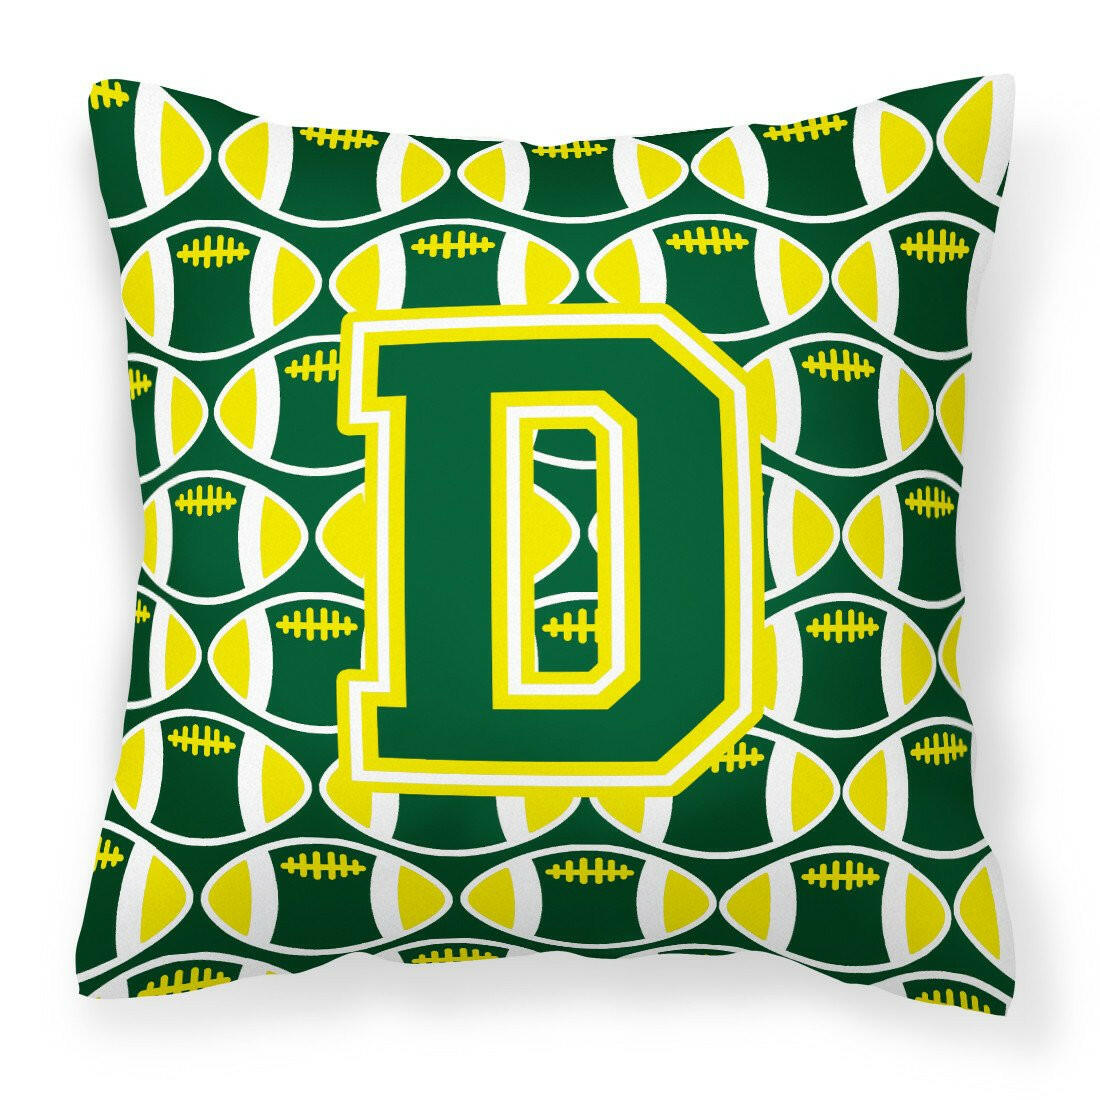 Letter D Football Green and Yellow Fabric Decorative Pillow CJ1075-DPW1414 by Caroline's Treasures